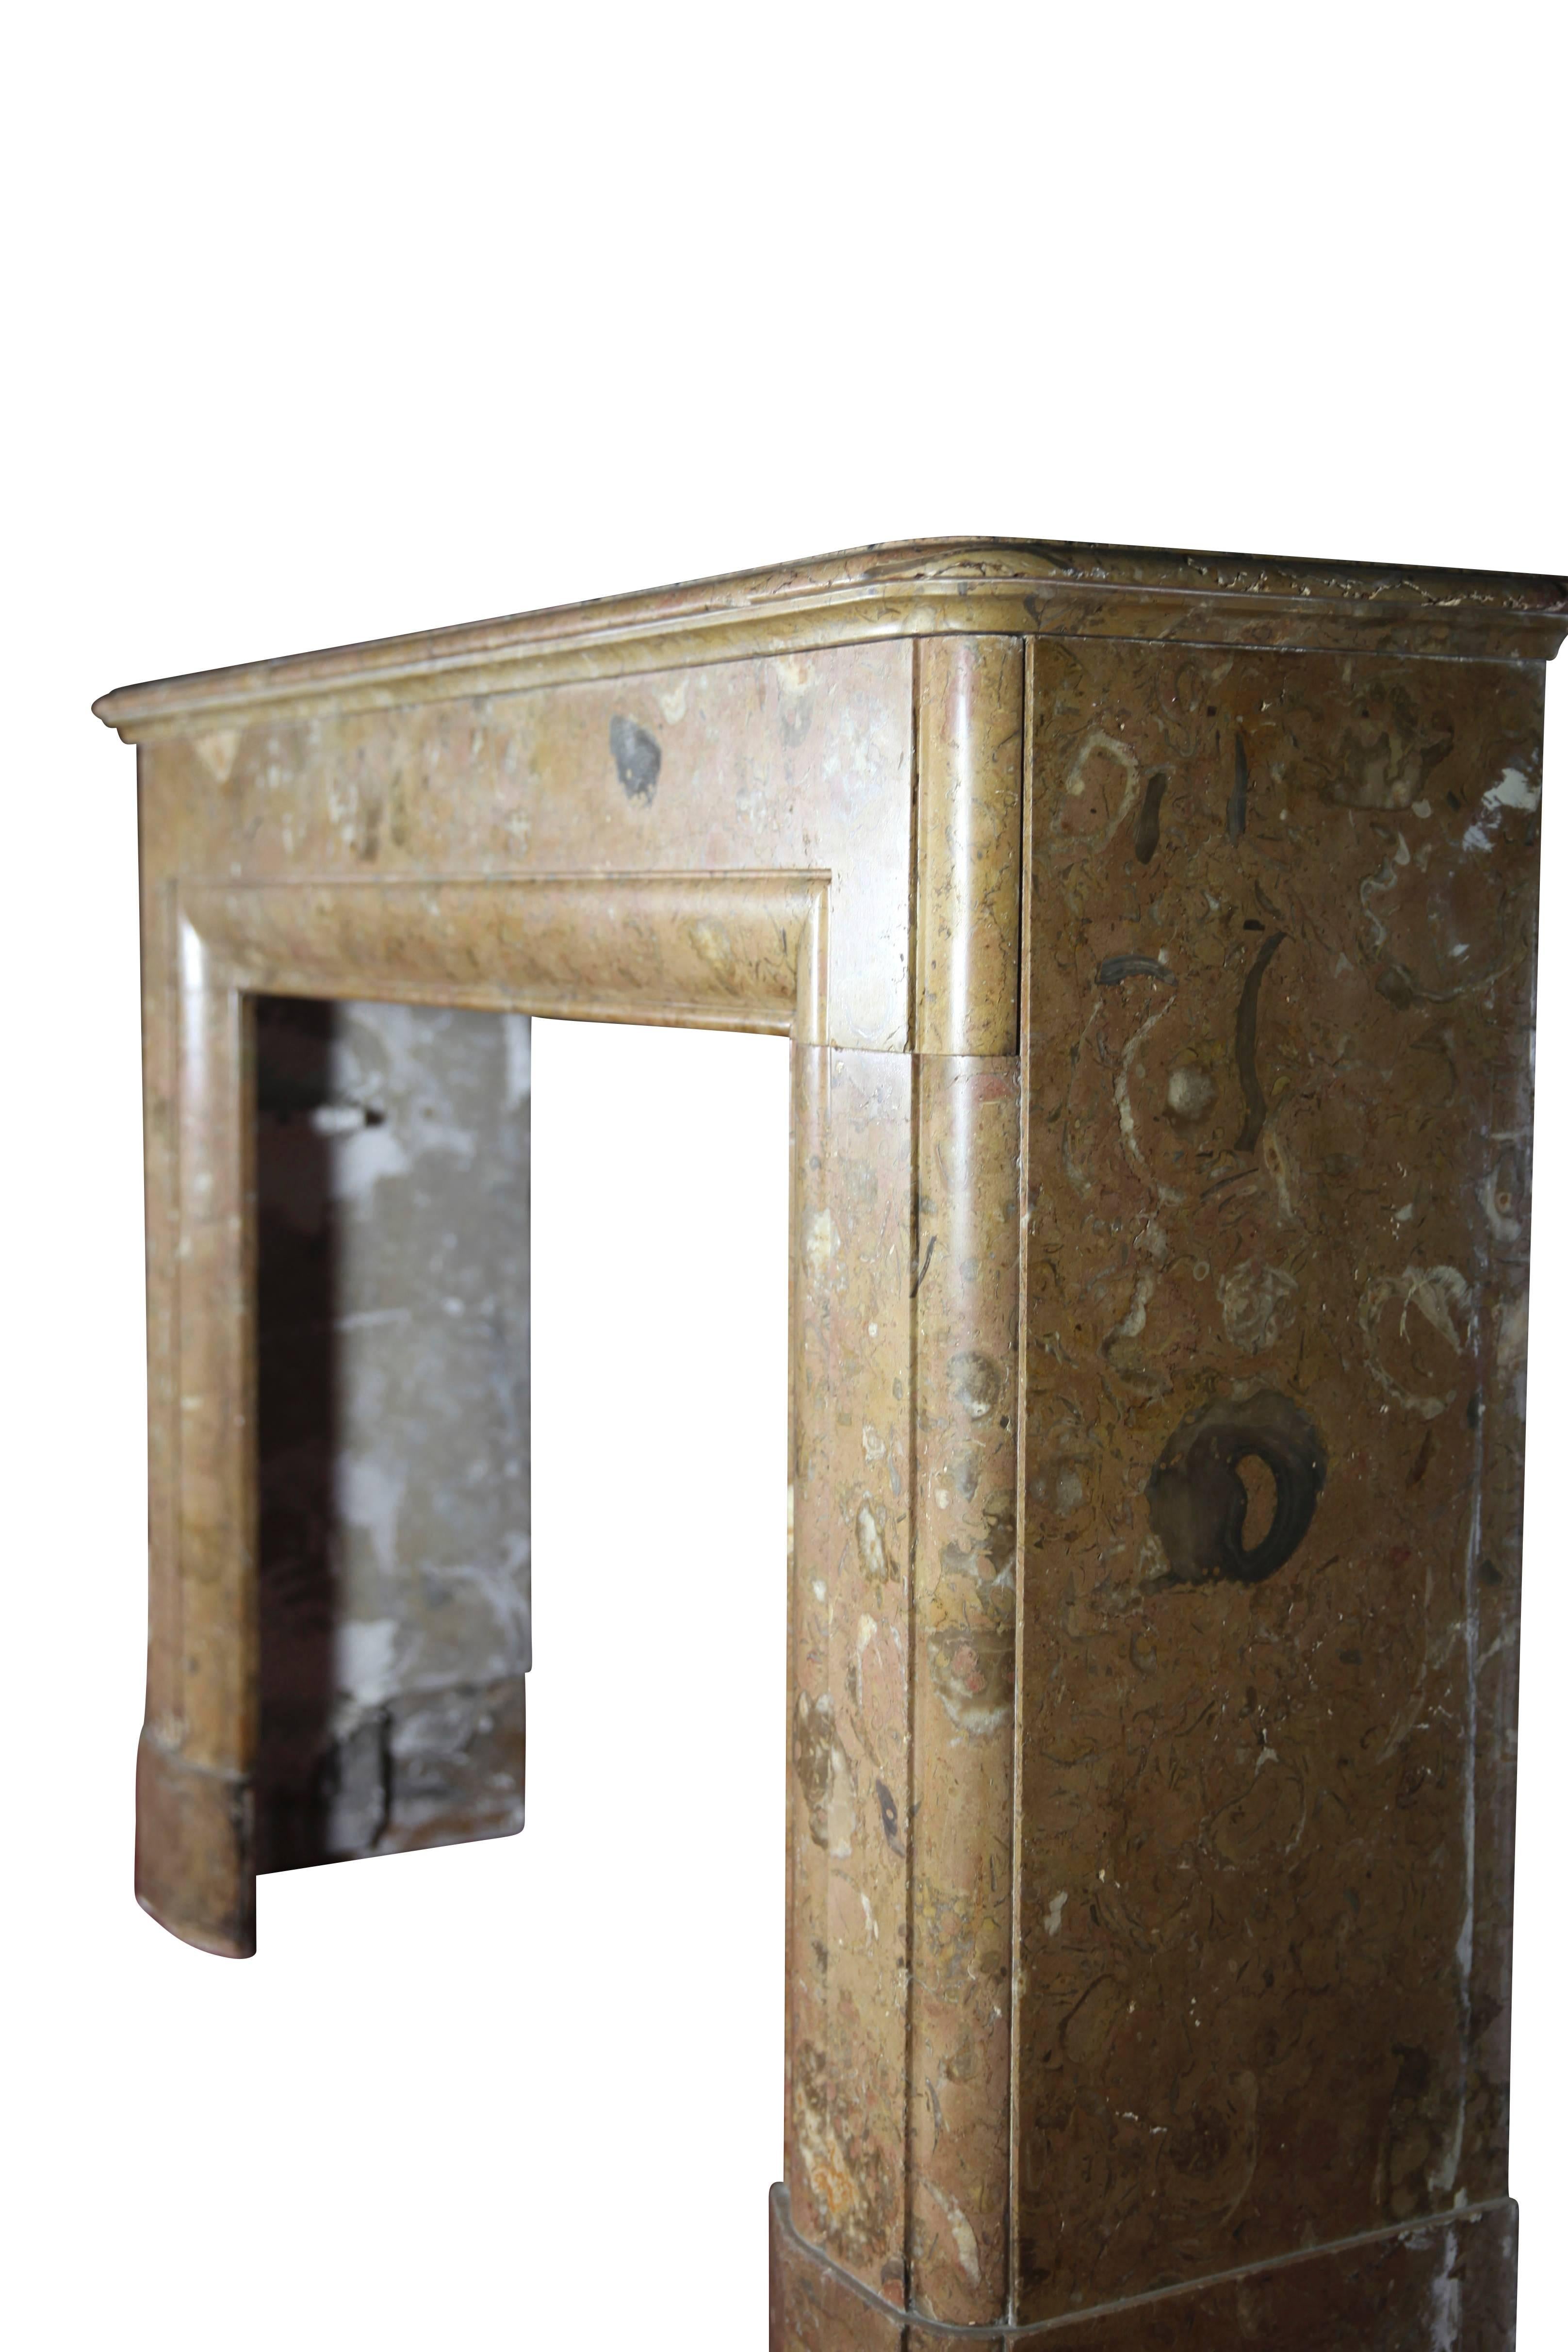 This Louis XIV style fireplace surround, in colored marble is a pre-Art Deco style. The straight line and round corner are typical of that period. Works also perfect in a contemporary or modern timeless interior design concept with beautiful modern